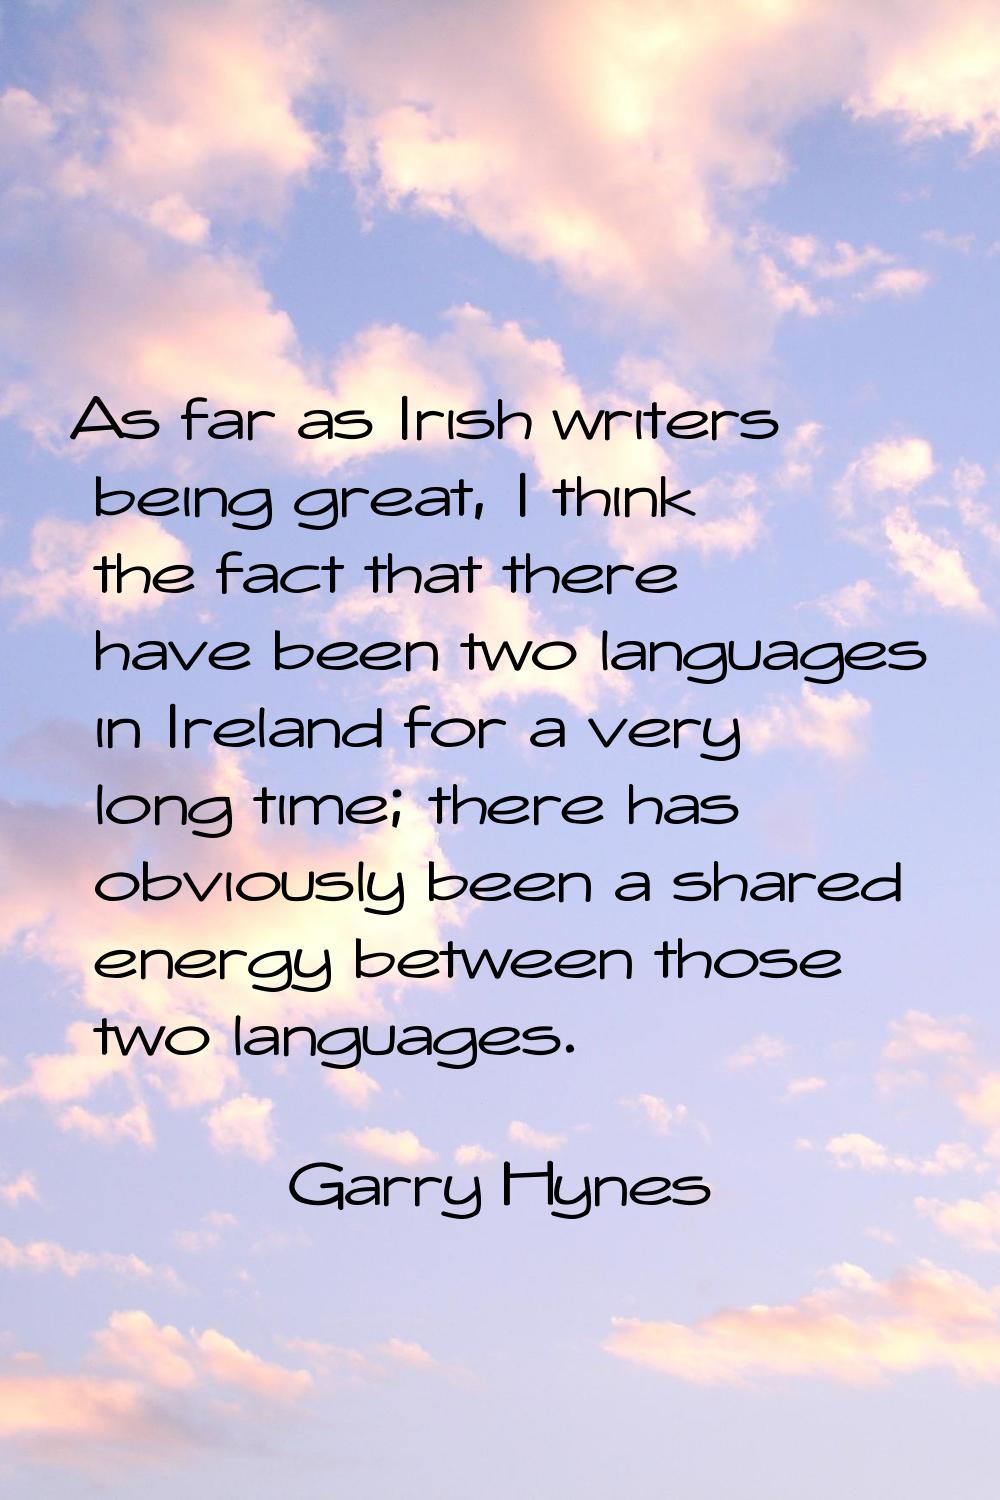 As far as Irish writers being great, I think the fact that there have been two languages in Ireland